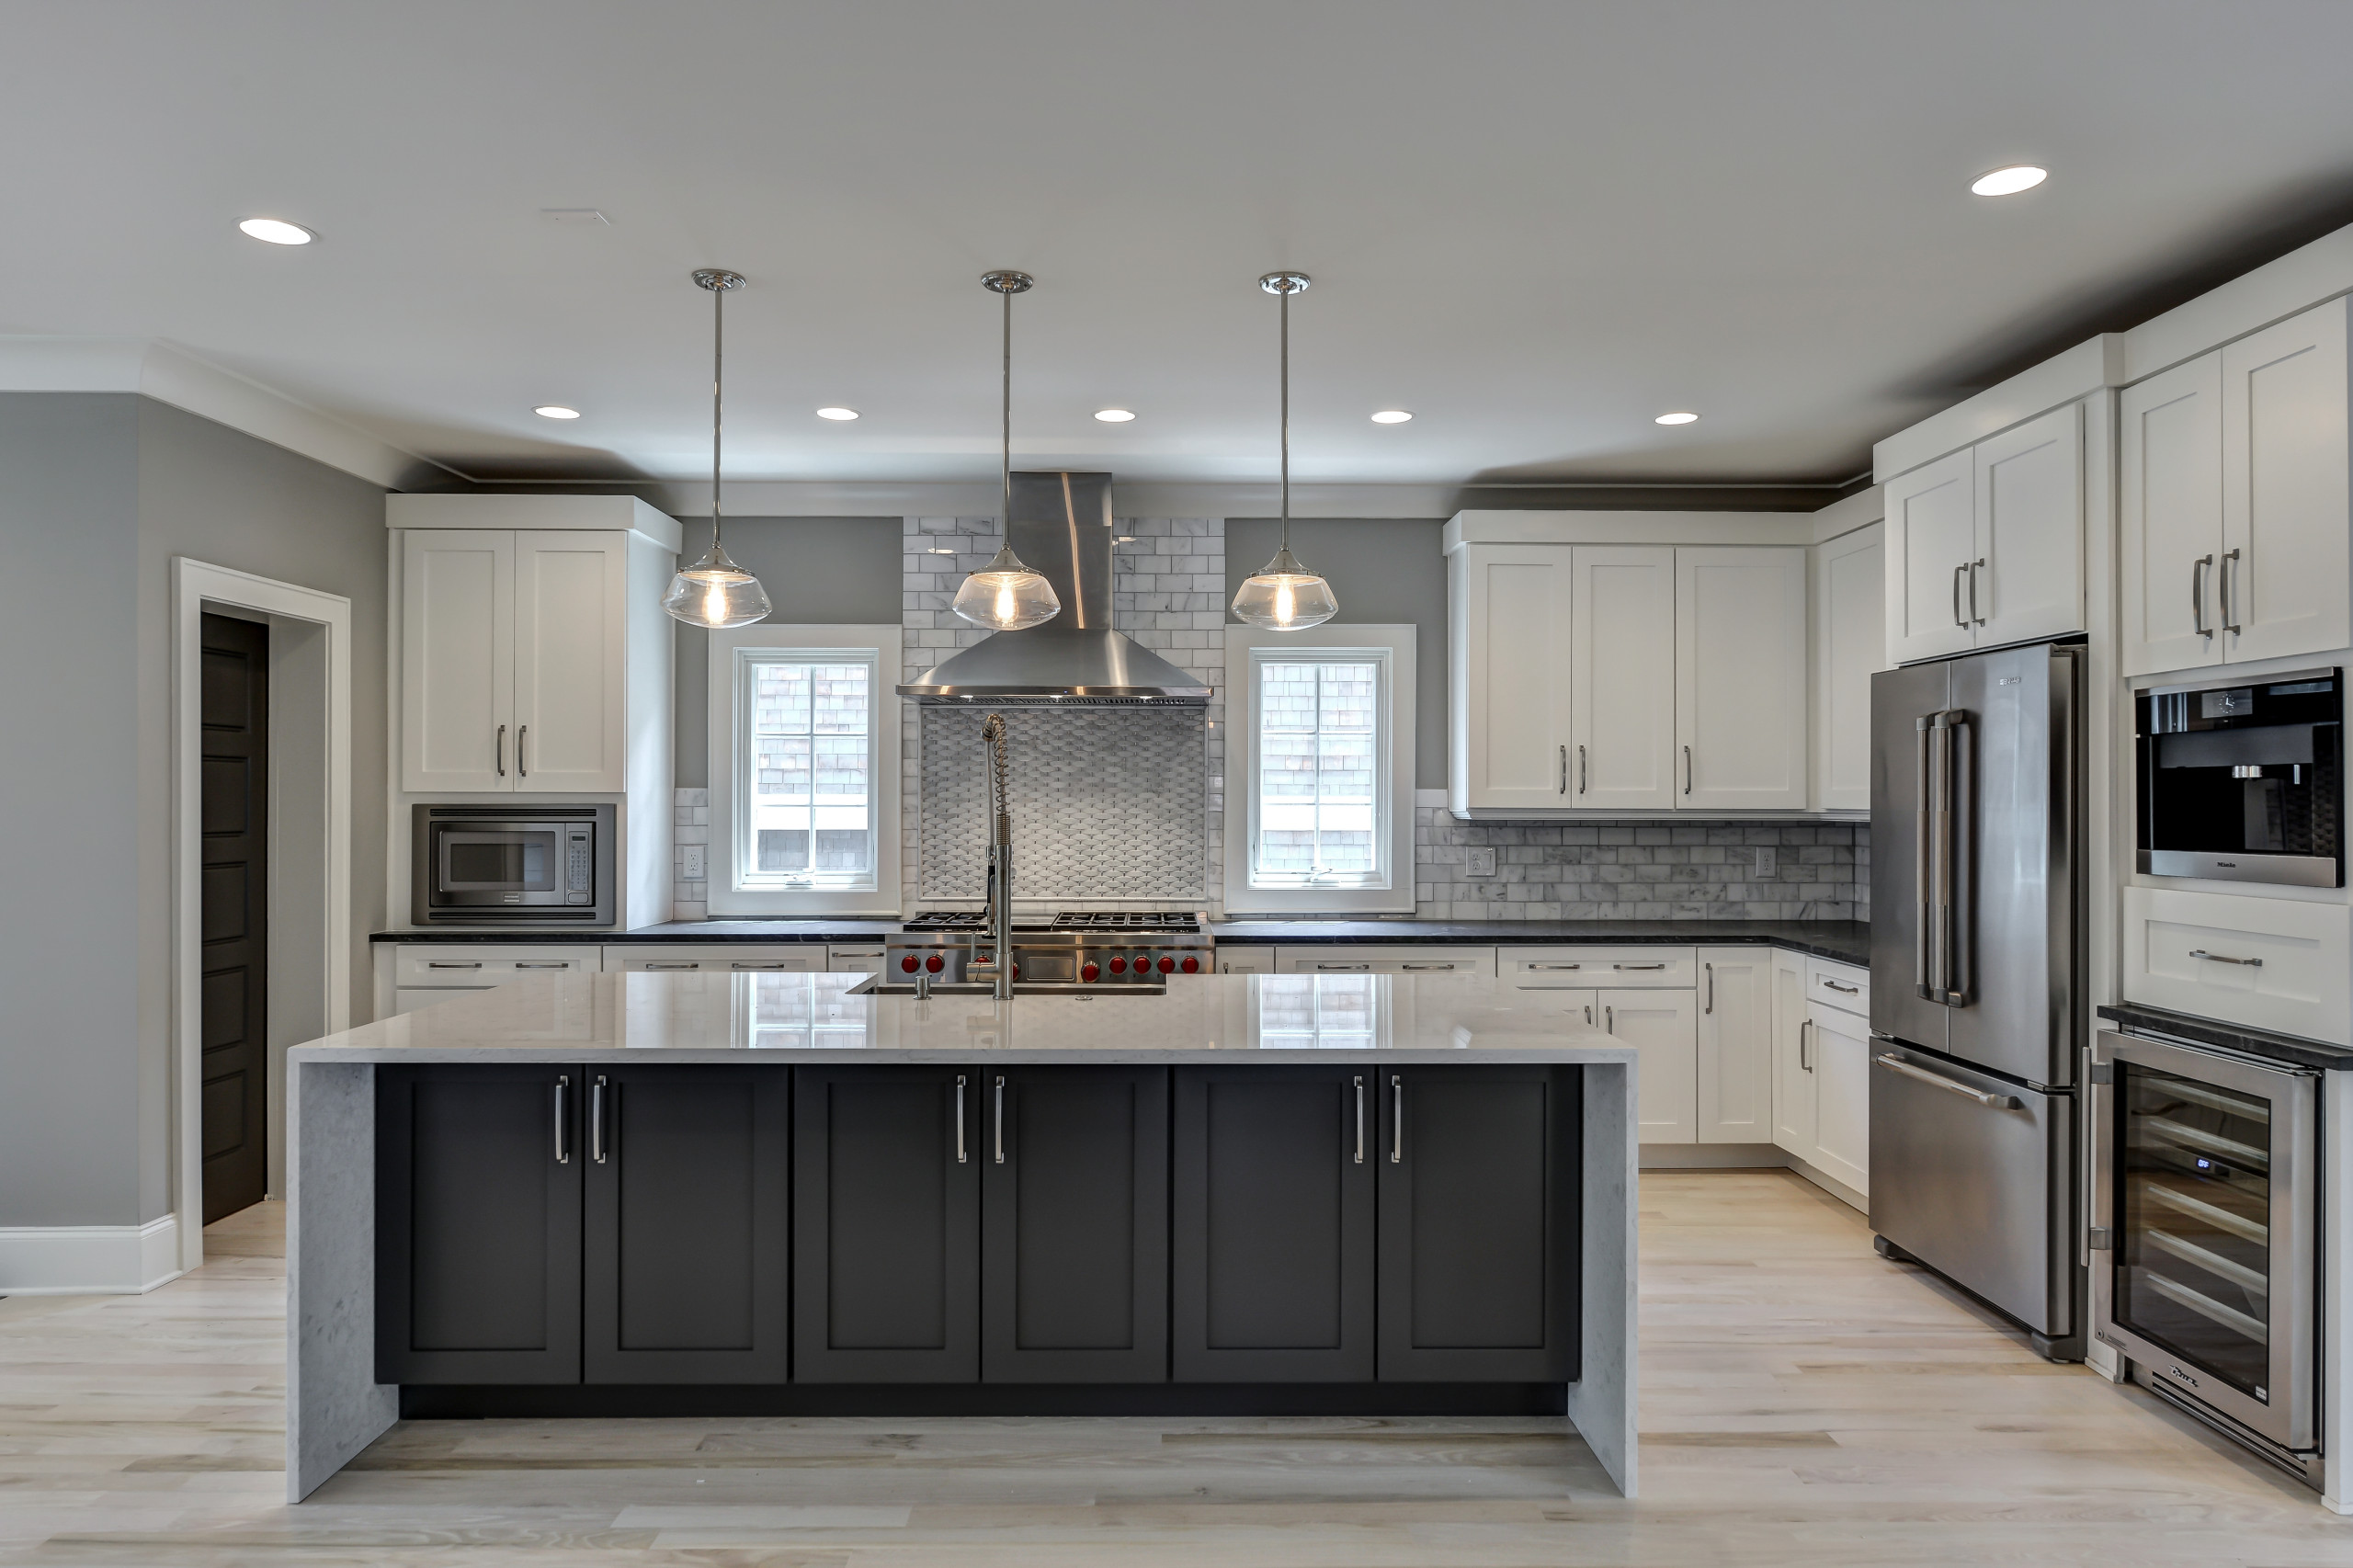 75 Beautiful Kitchen With Stone Tile Backsplash Pictures Ideas May 2021 Houzz